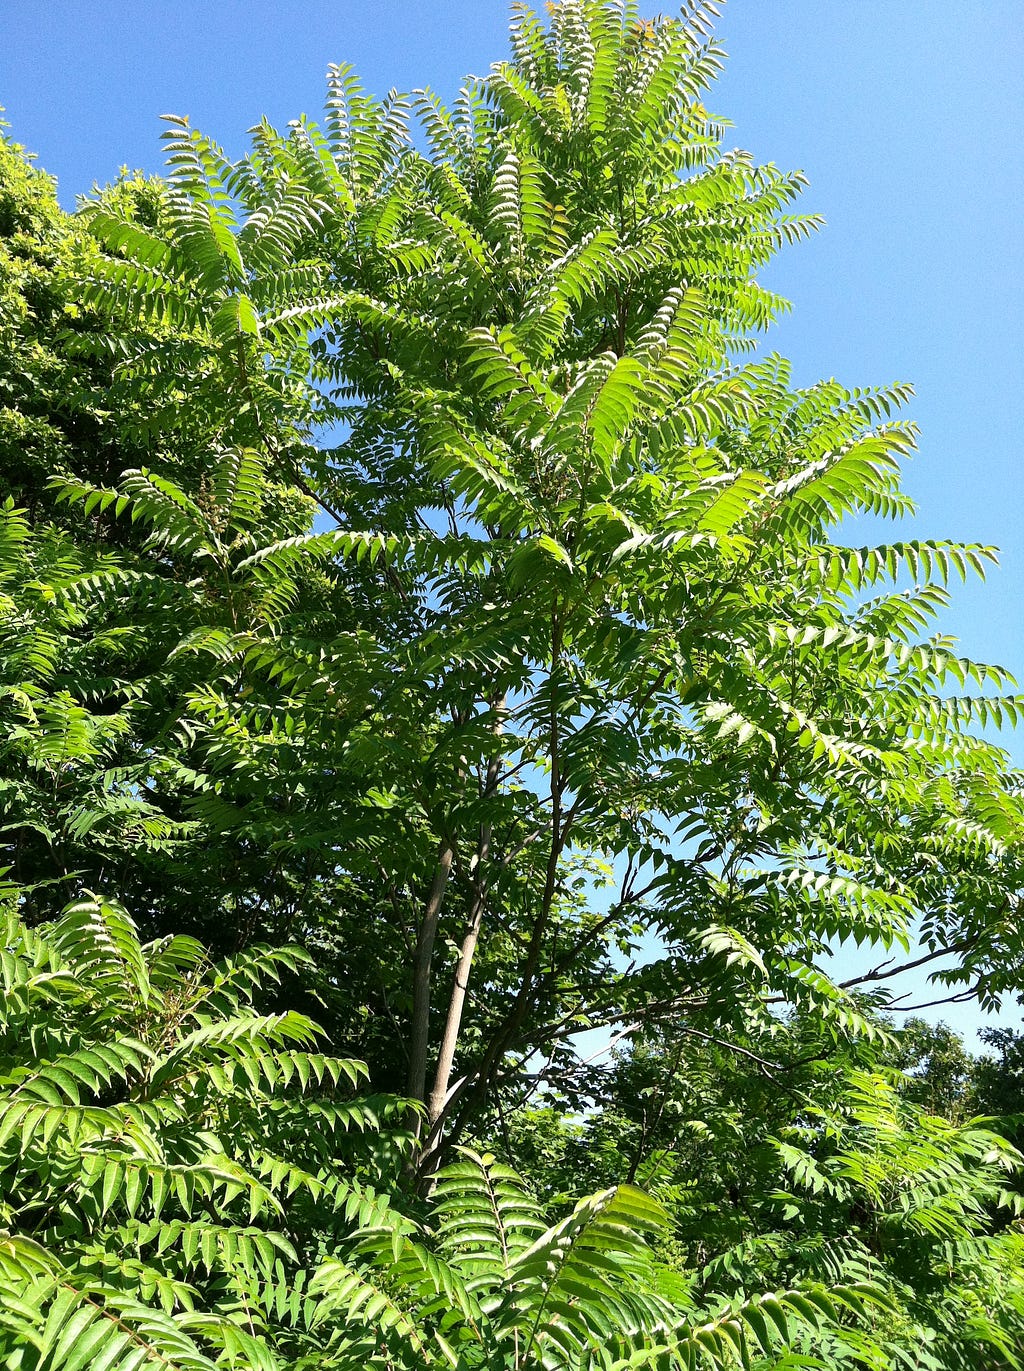 a tree with leafy green branches stretches toward a blue sky